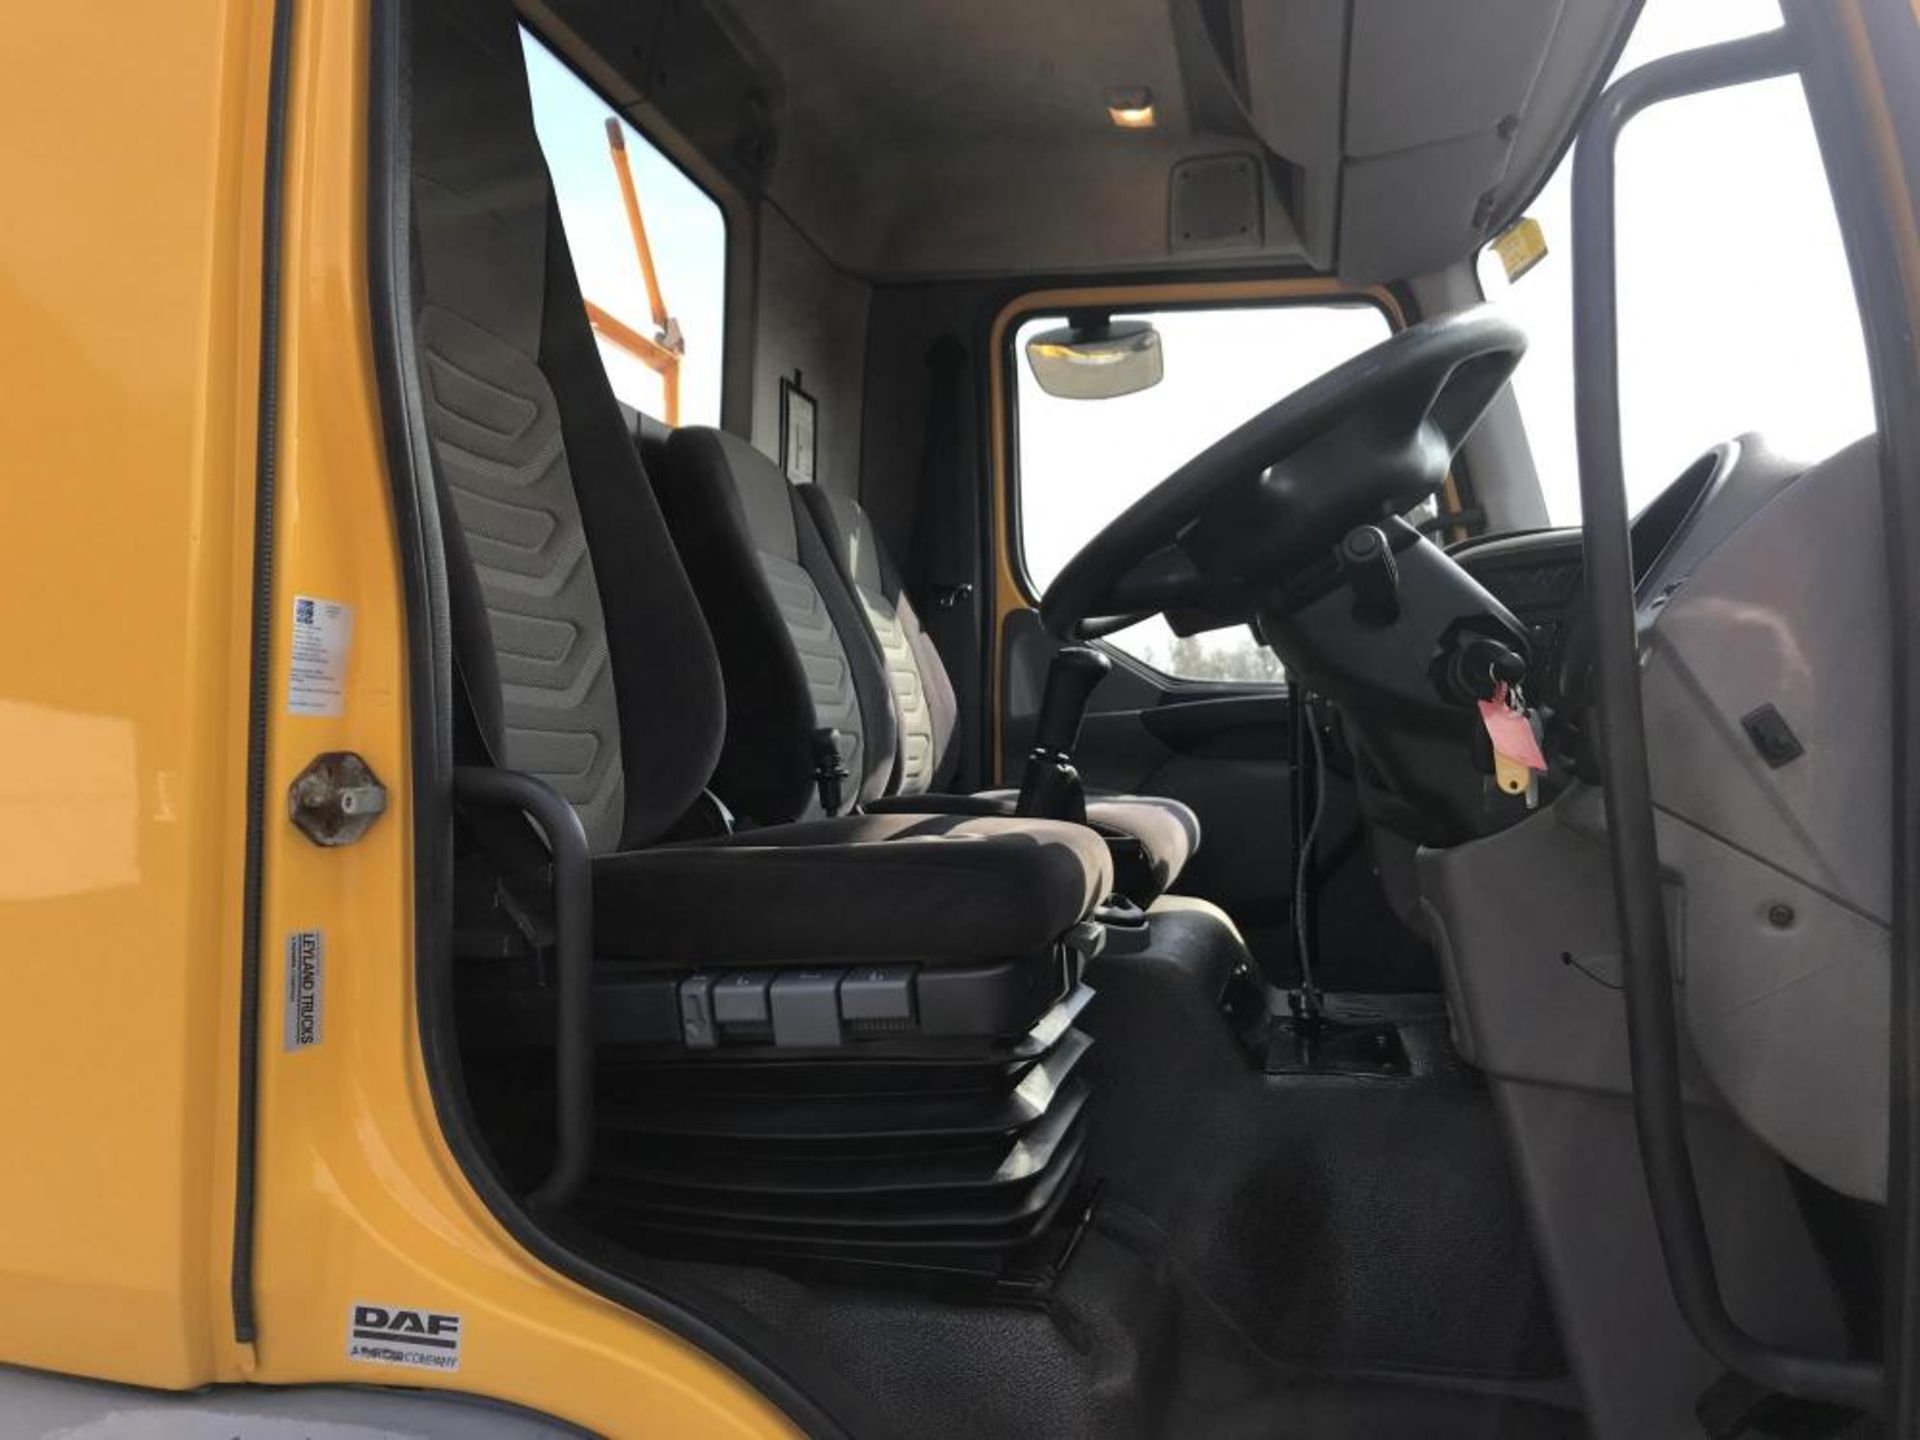 2010/60 REG DAF TRUCKS LF FA 55.220 18 TON GRITTER EX COUNCIL ECON BODY SPREADER MANUAL GEARBOX - Image 8 of 14